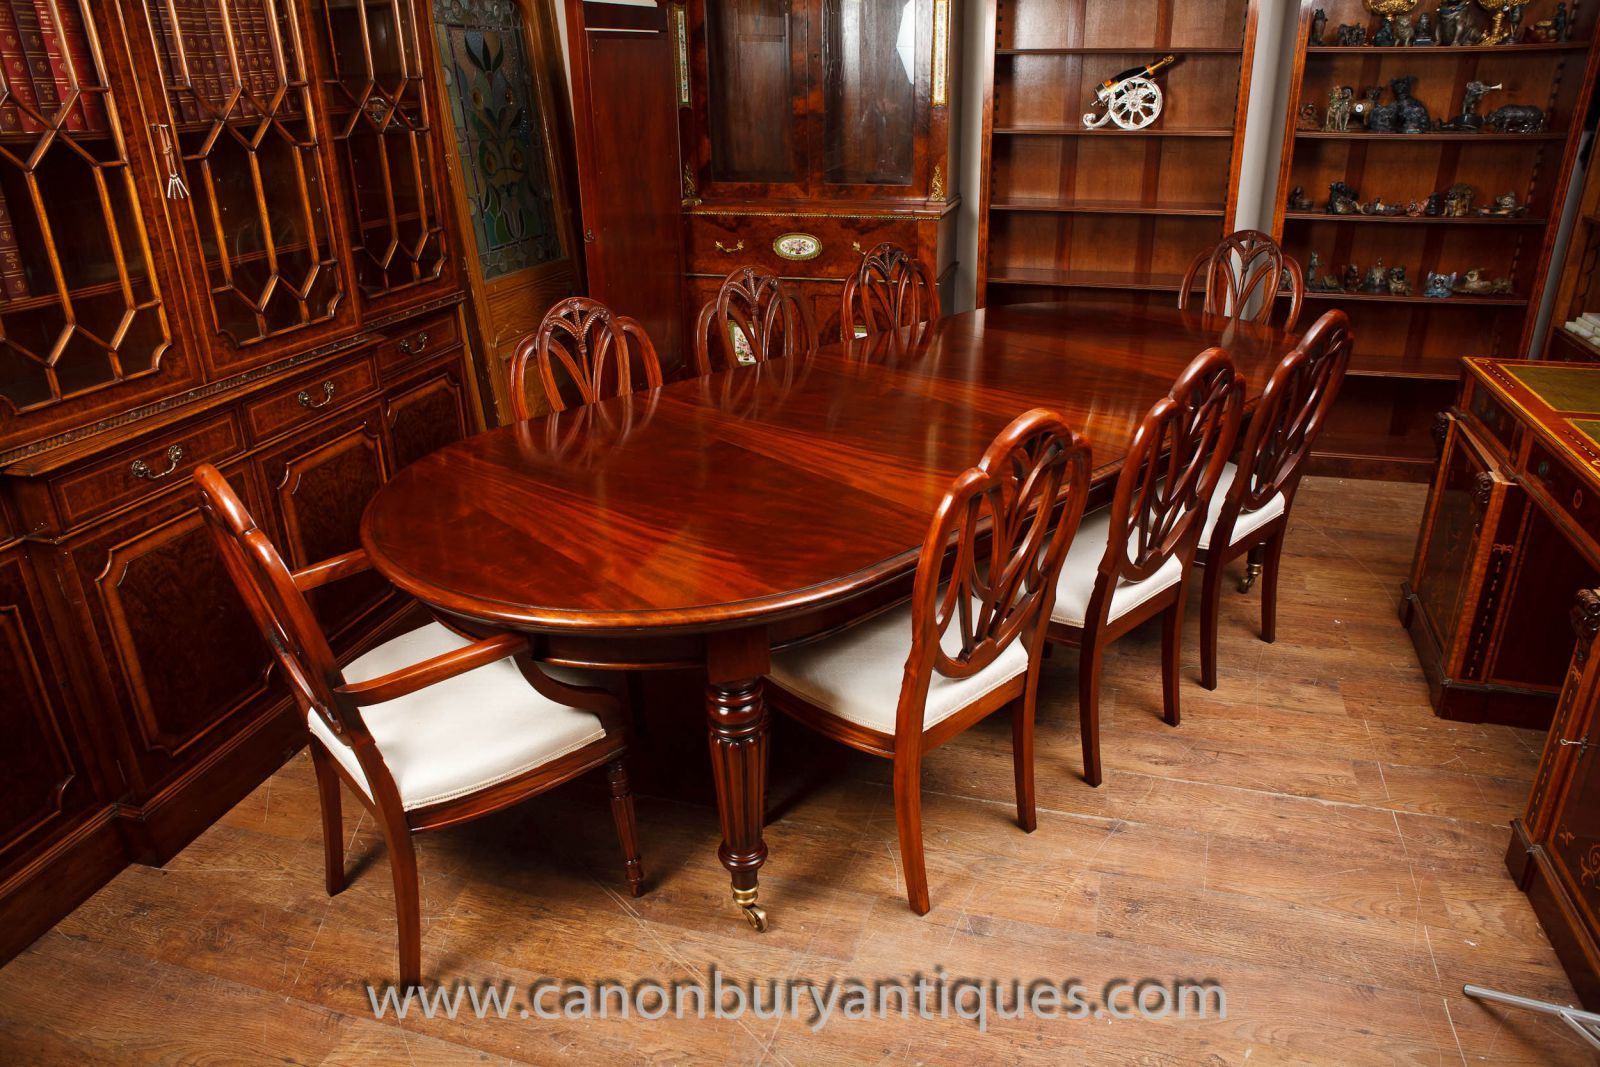 Flame mahogany table with set of Hepplewhite chairs to match